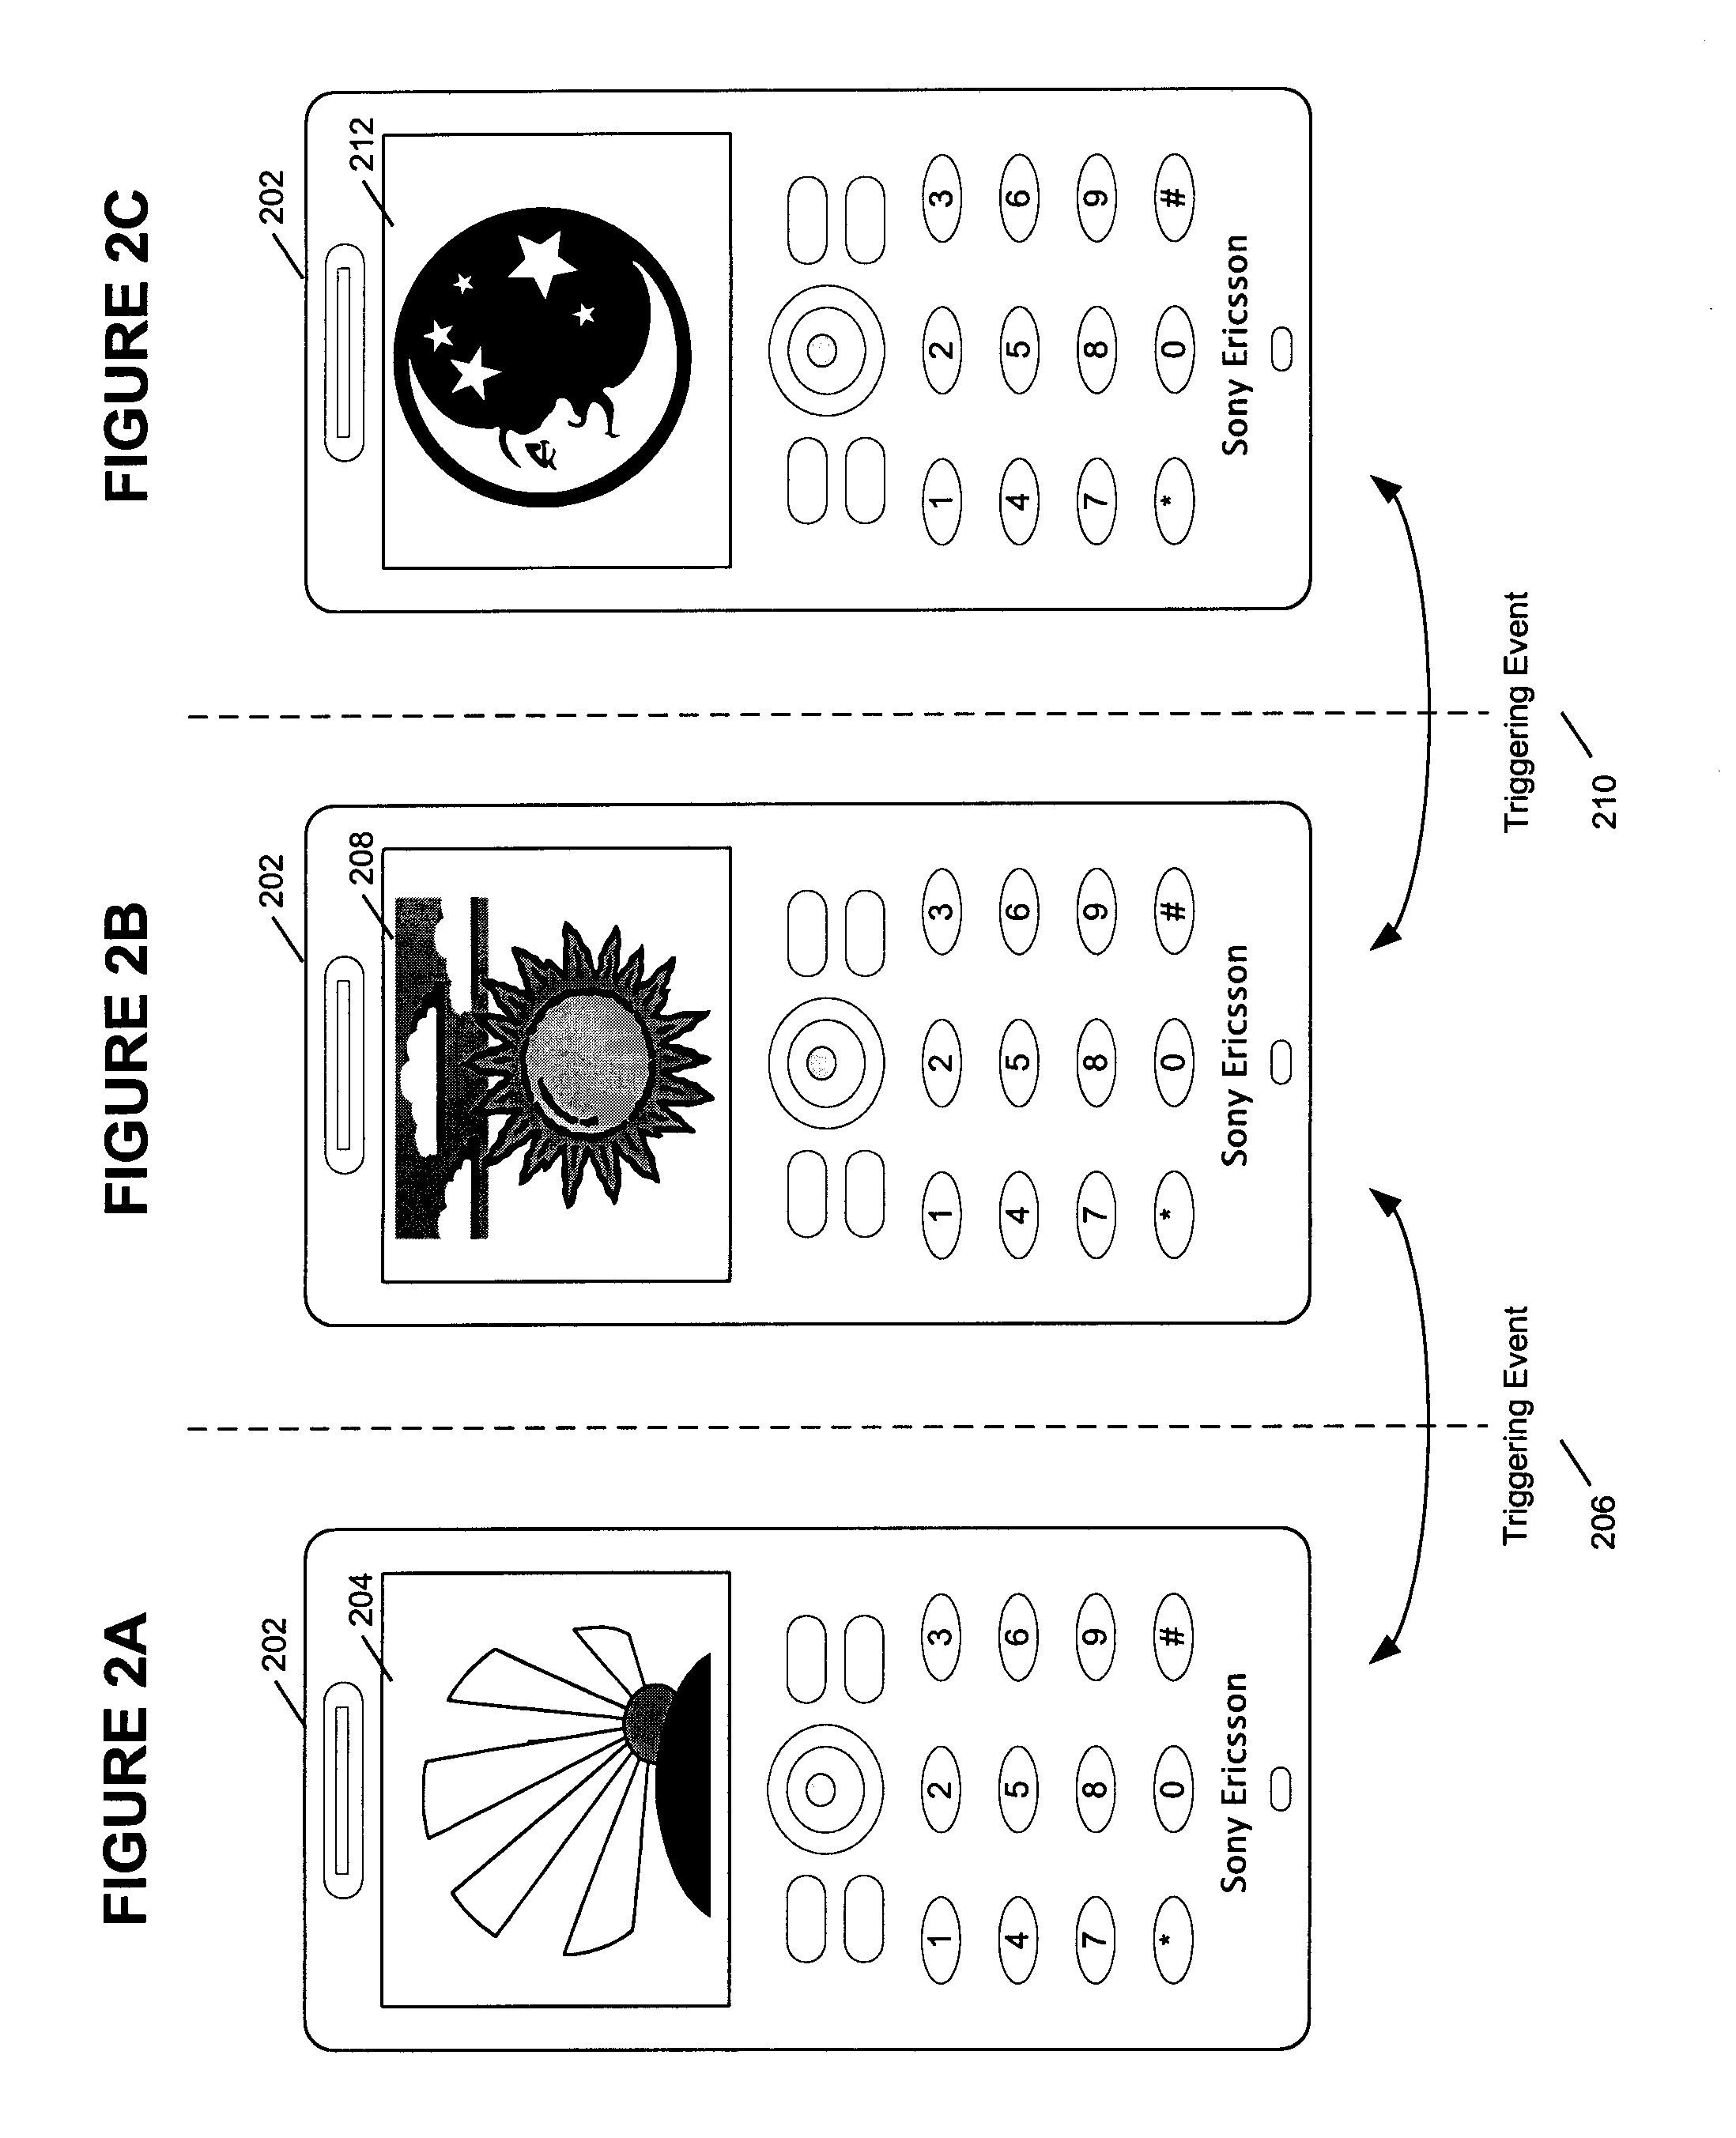 System method and computer program product for managing themes in a mobile phone